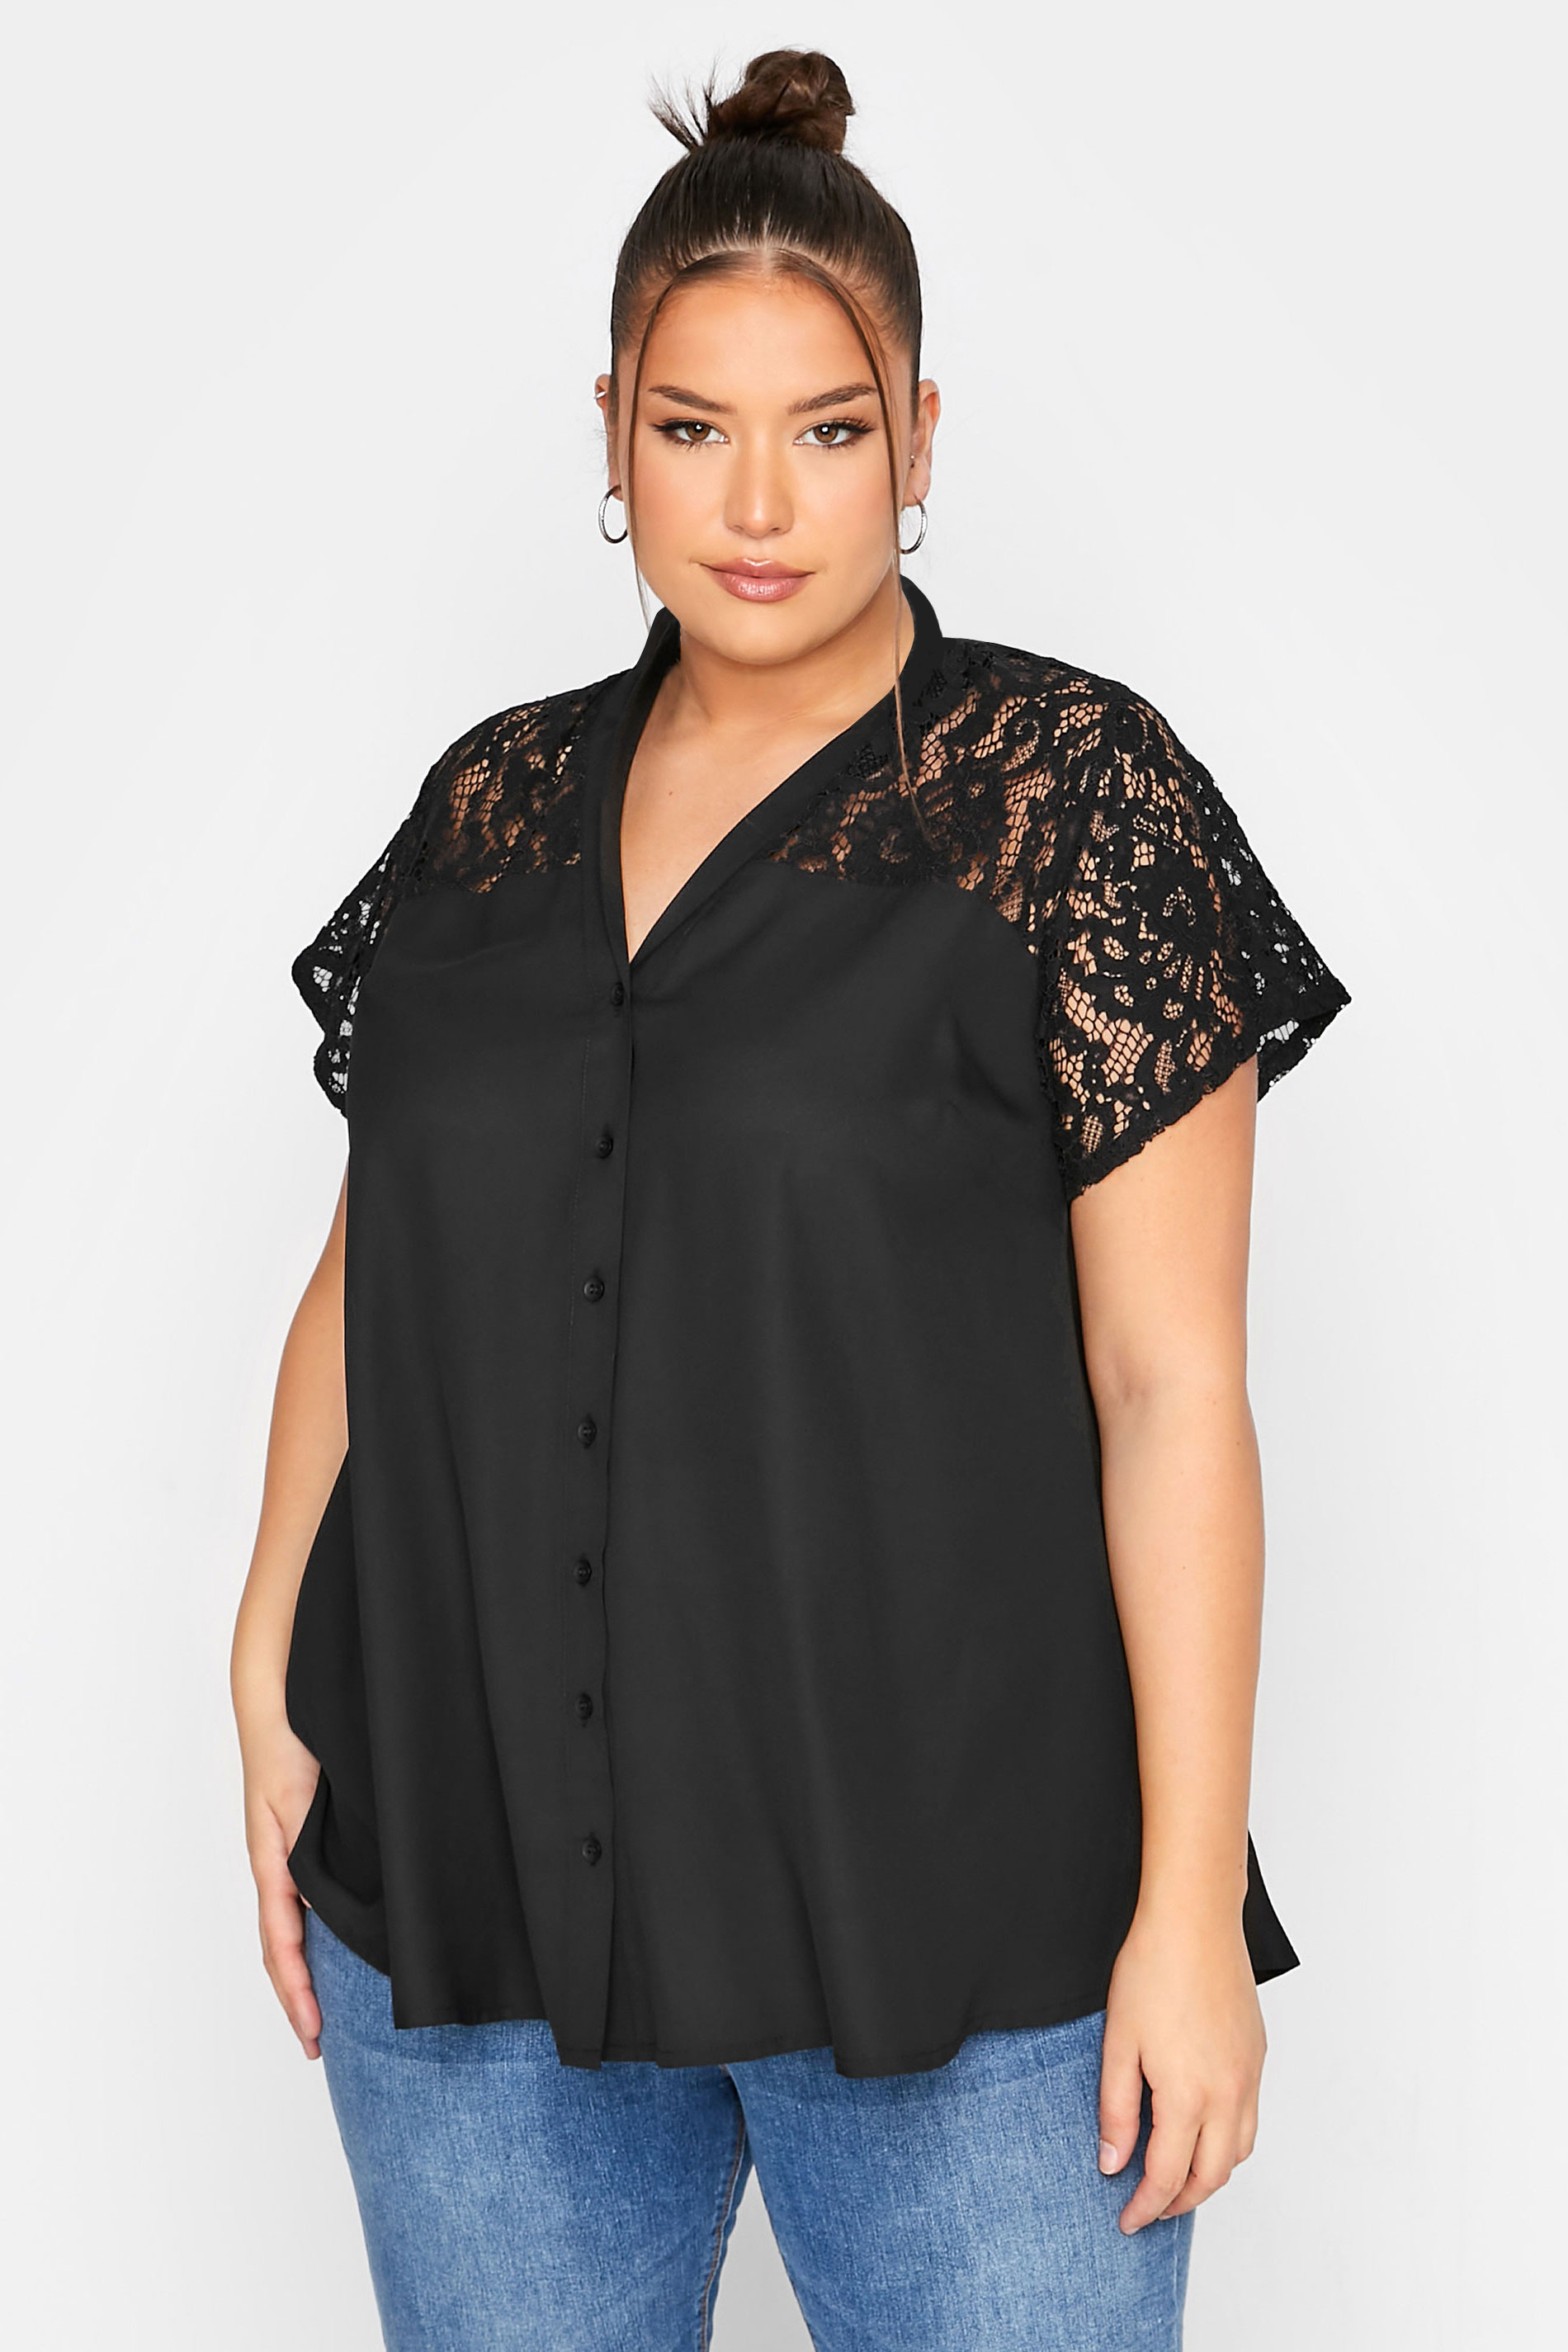 LIMITED COLLECTION Curve Black Lace Insert Blouse 1